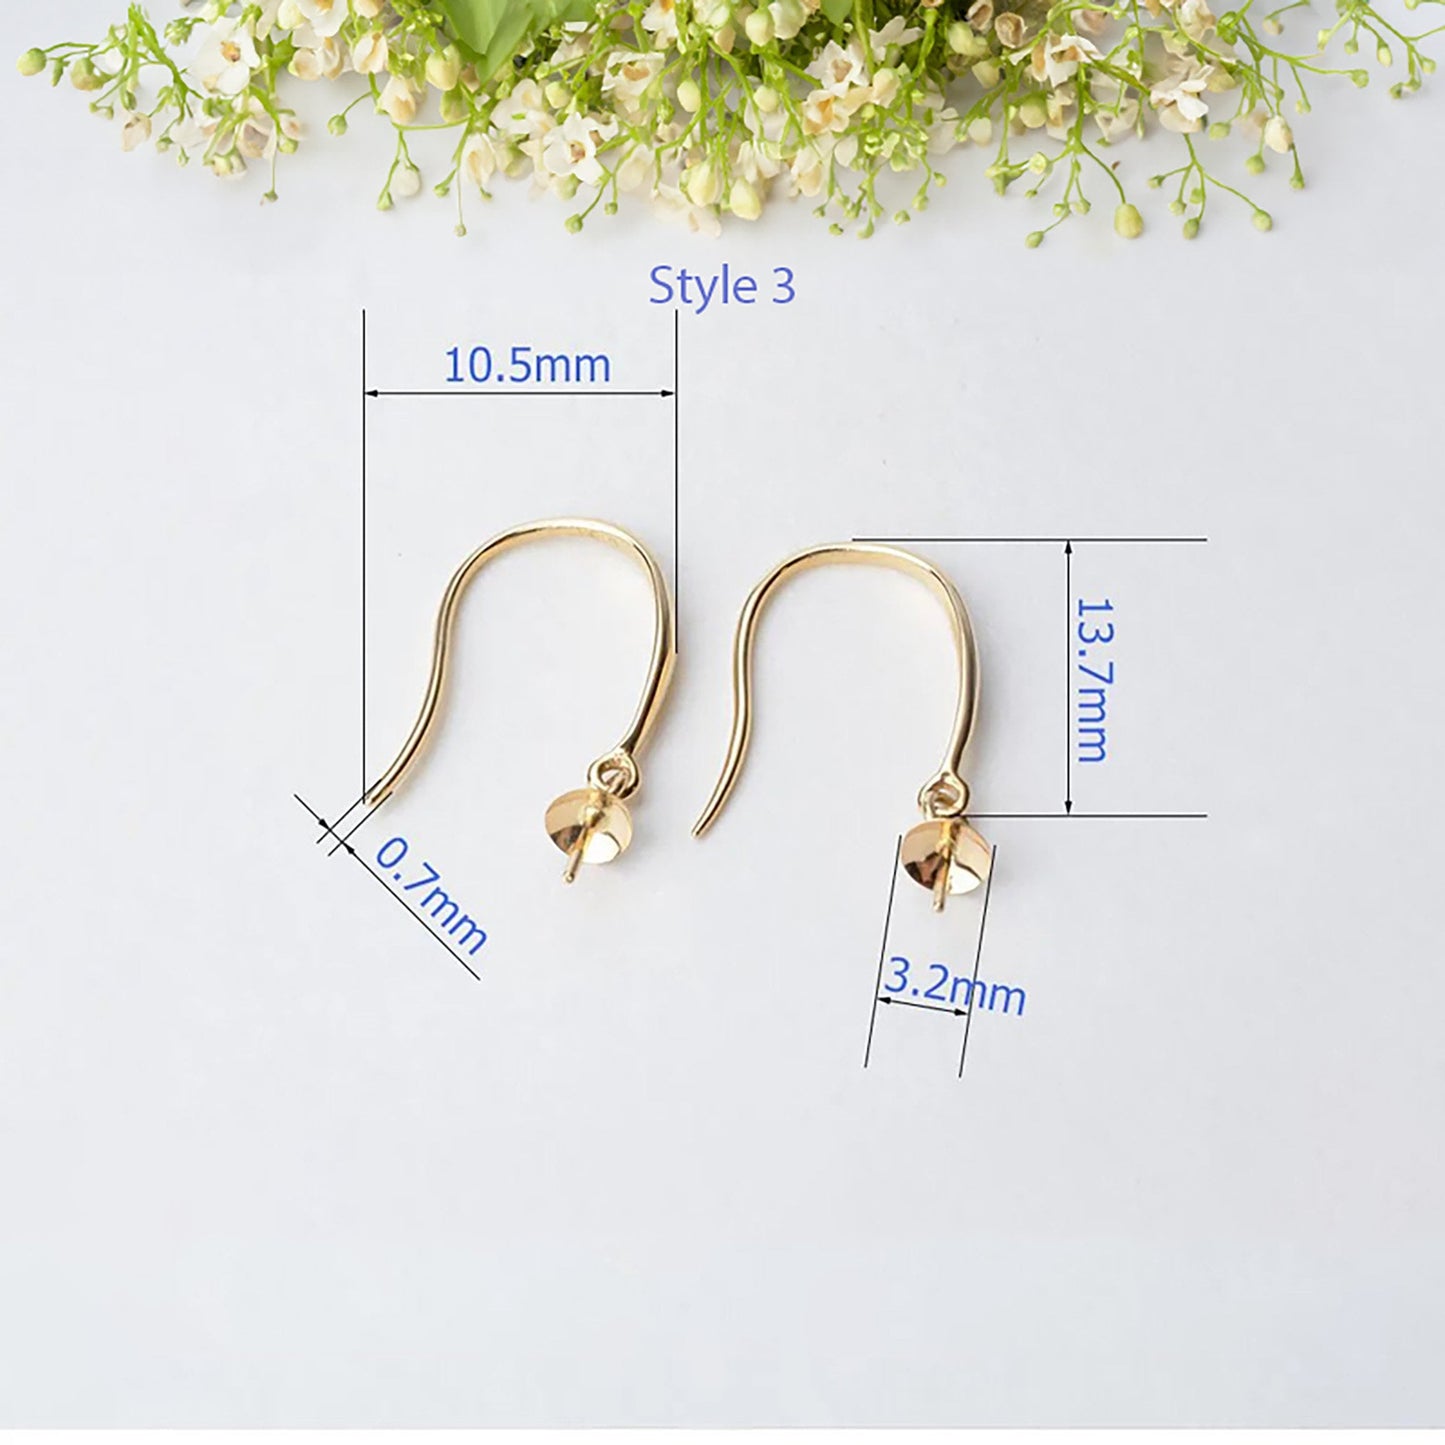 18k Gold Earring Hooks - High-Quality Hypoallergenic Ear wire, Nickel-Free Rose and White Gold Fish Hooks, Variant with ball or Eyepin bead